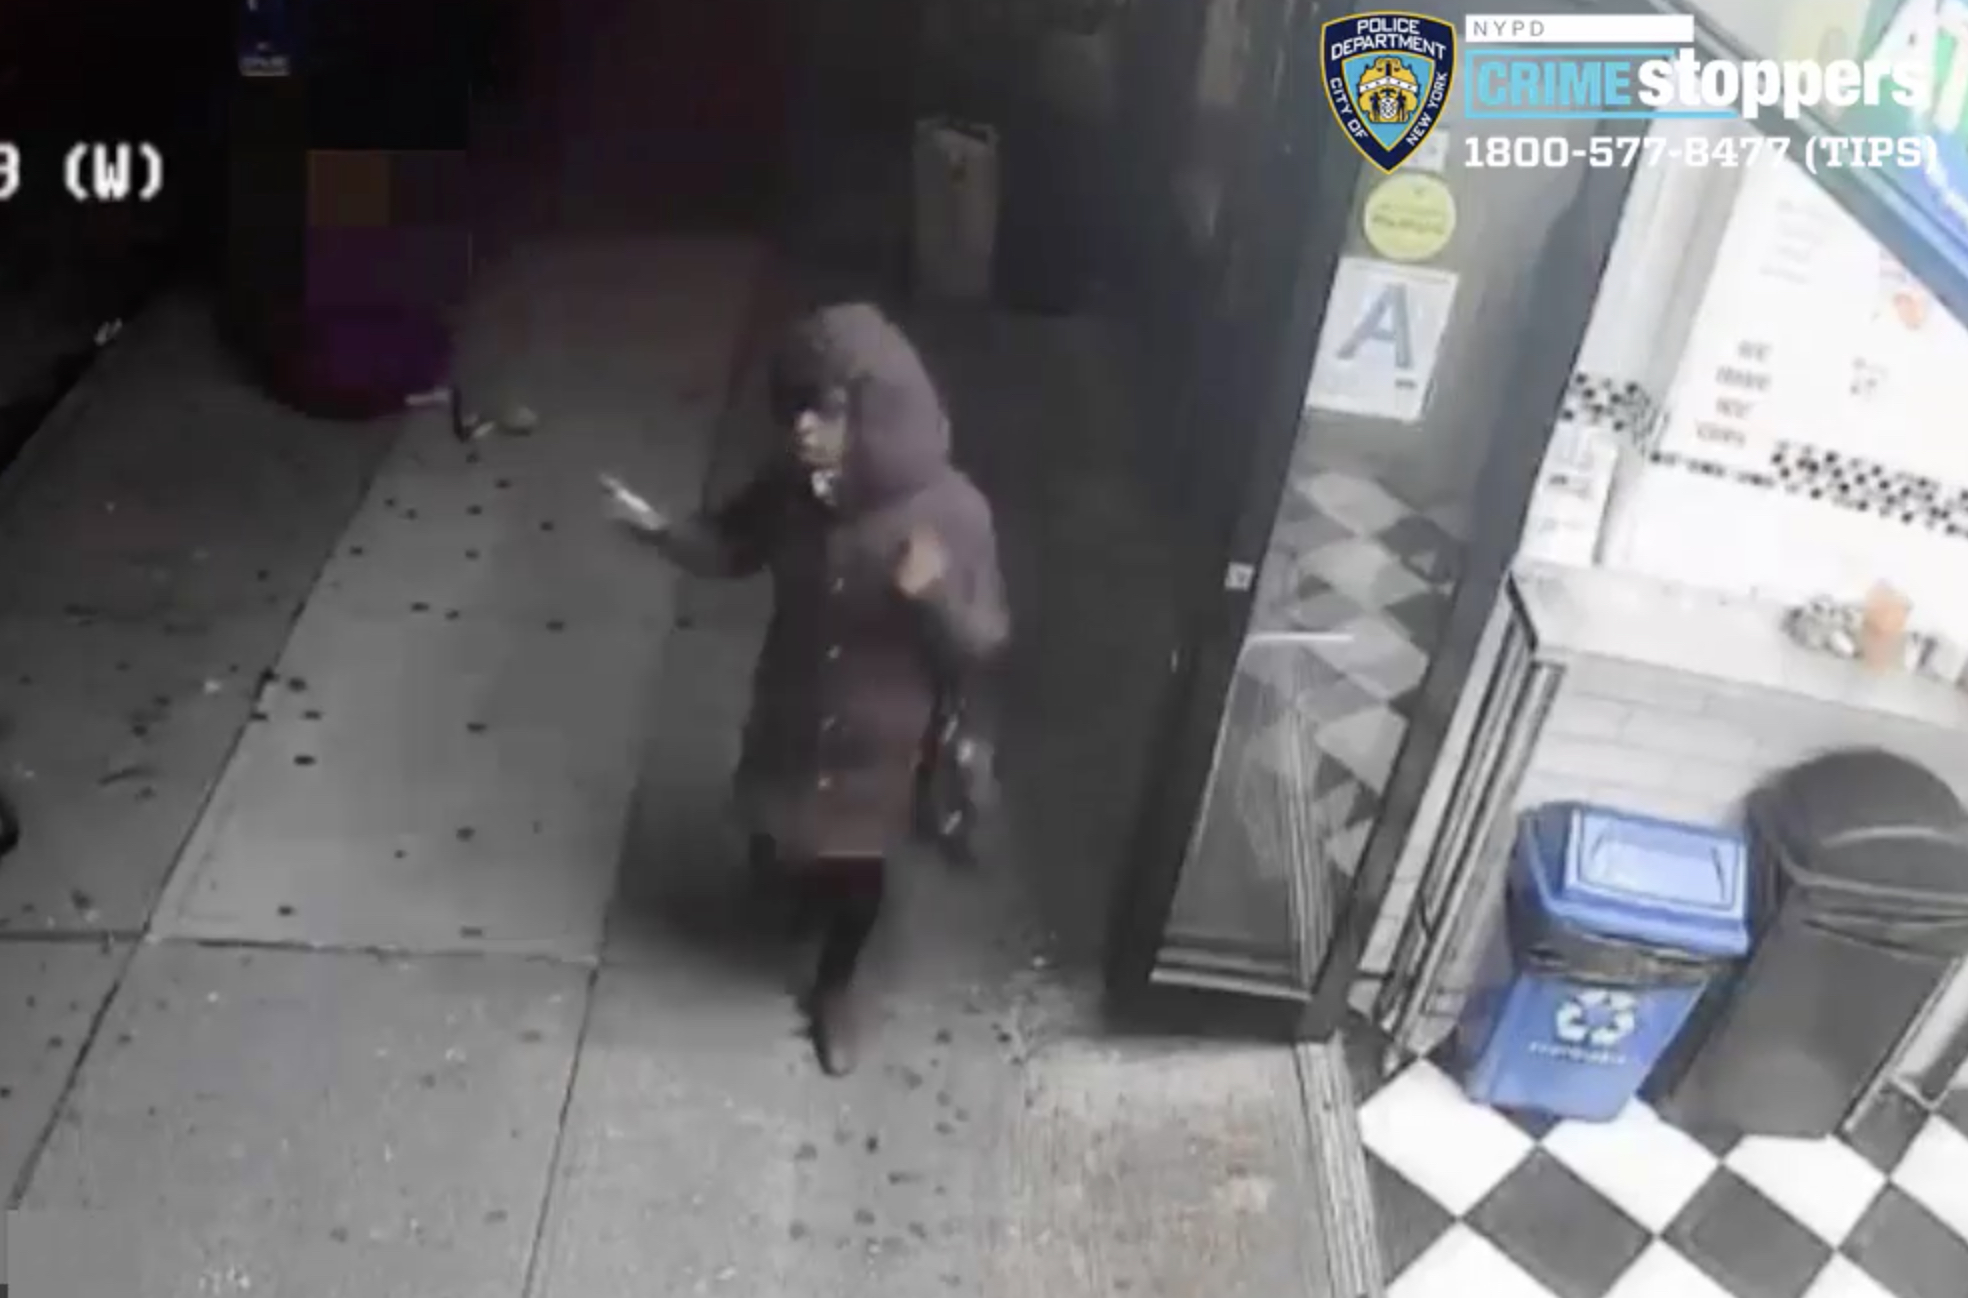 72 Year Old Woman Assaulted On Houston Street Police Say Amnewyork